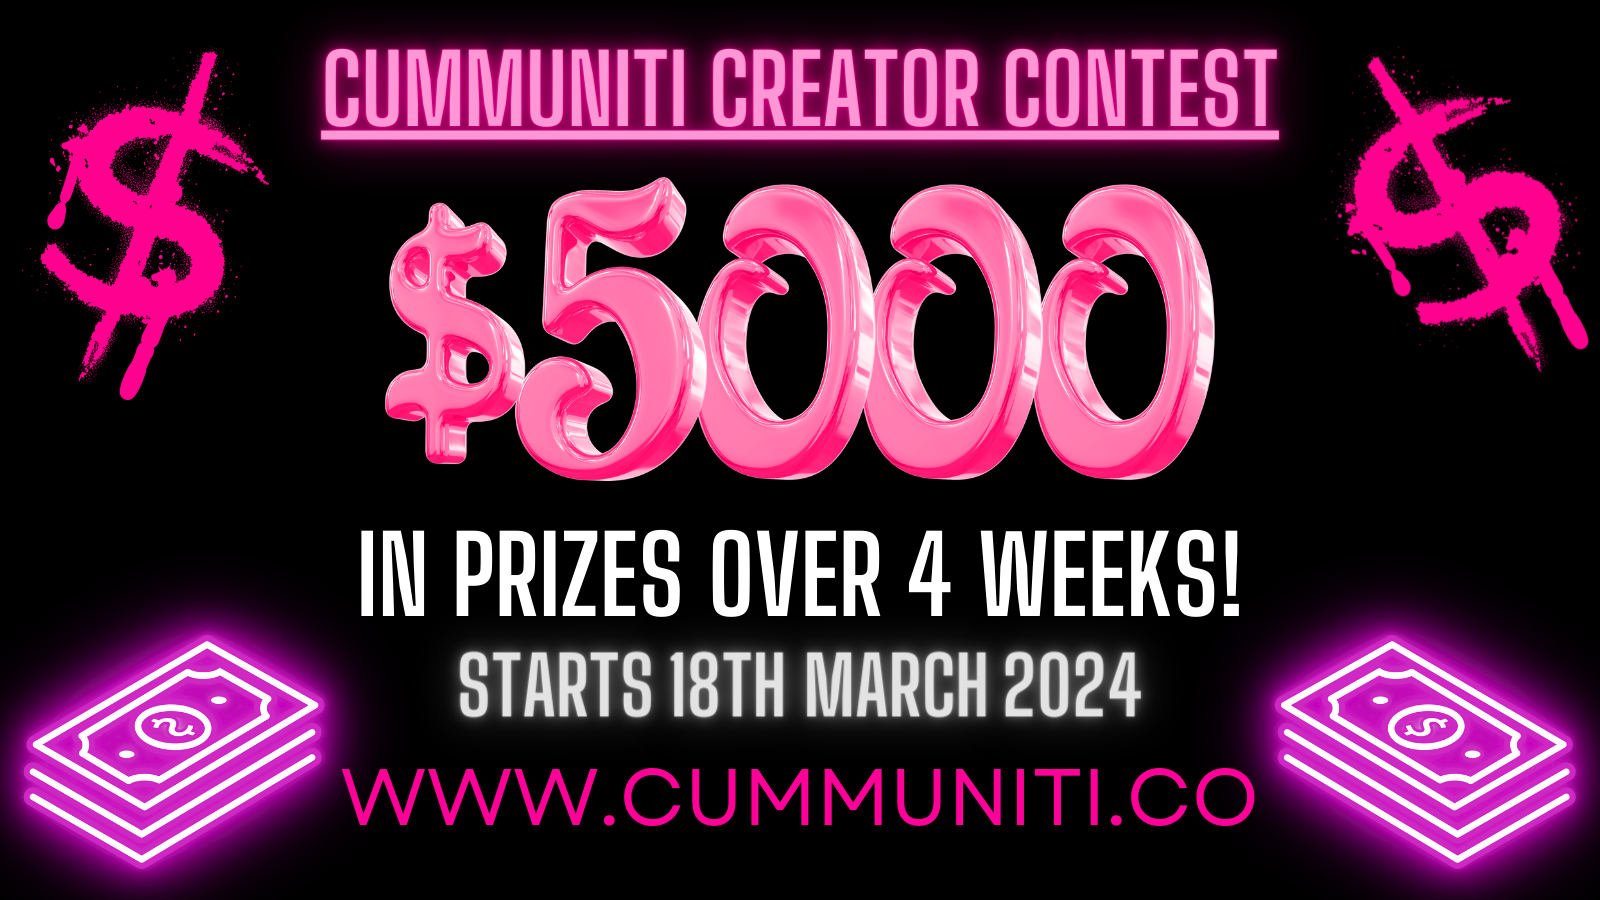 $5,000 Cummuniti Creator Content Contest running over 4 weeks with weekly prizes.